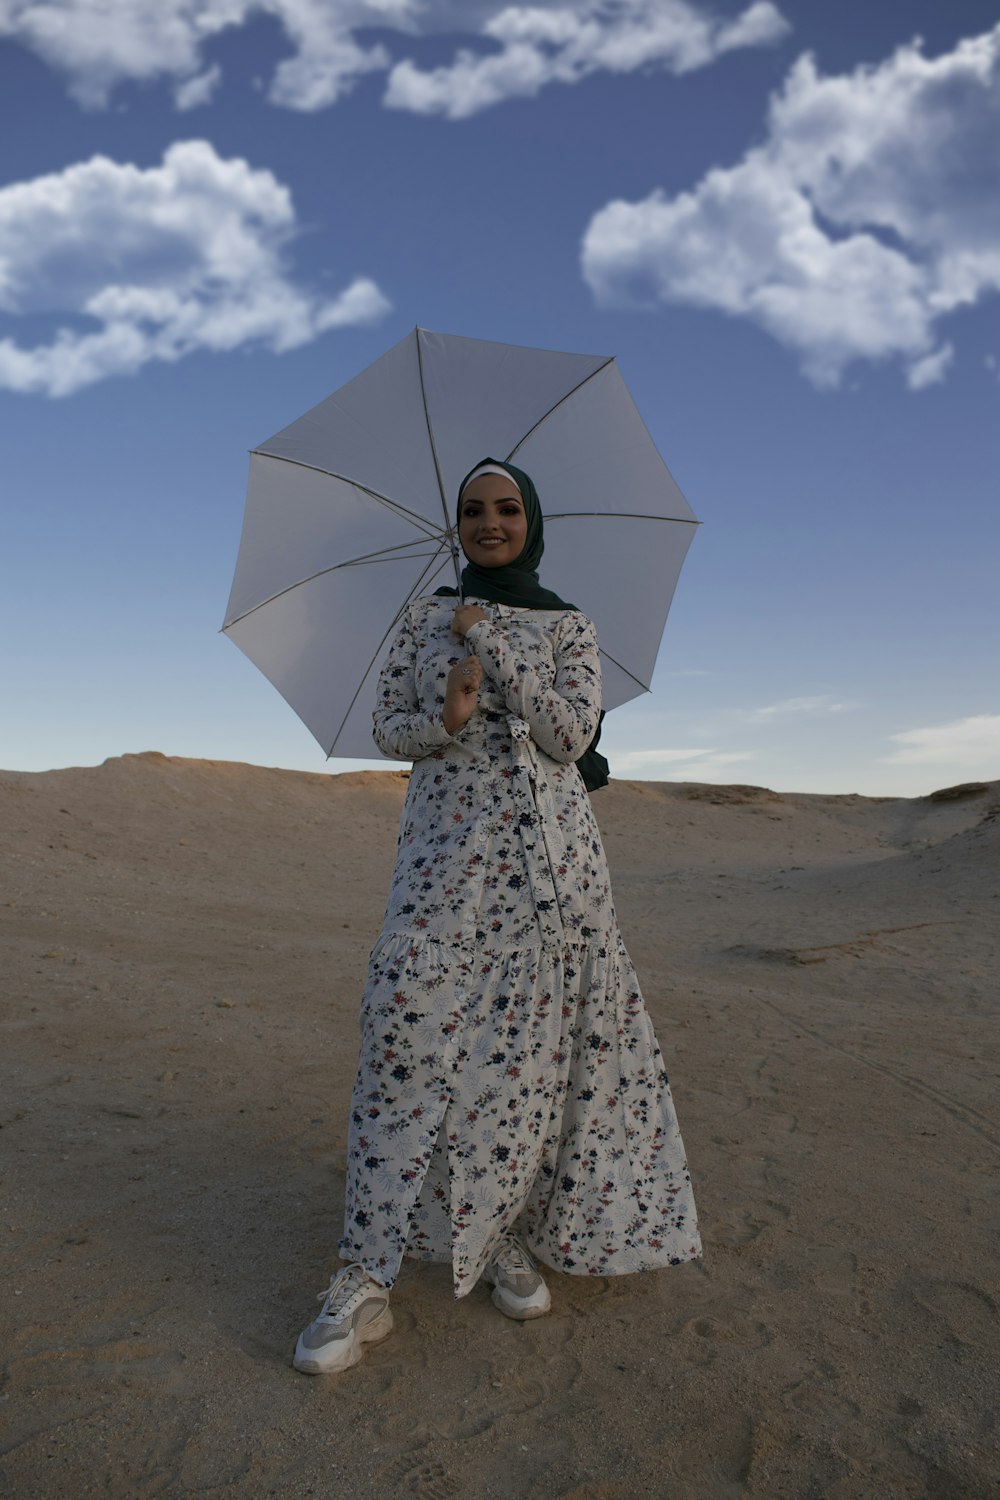 woman in white and black floral dress holding umbrella walking on brown sand during daytime